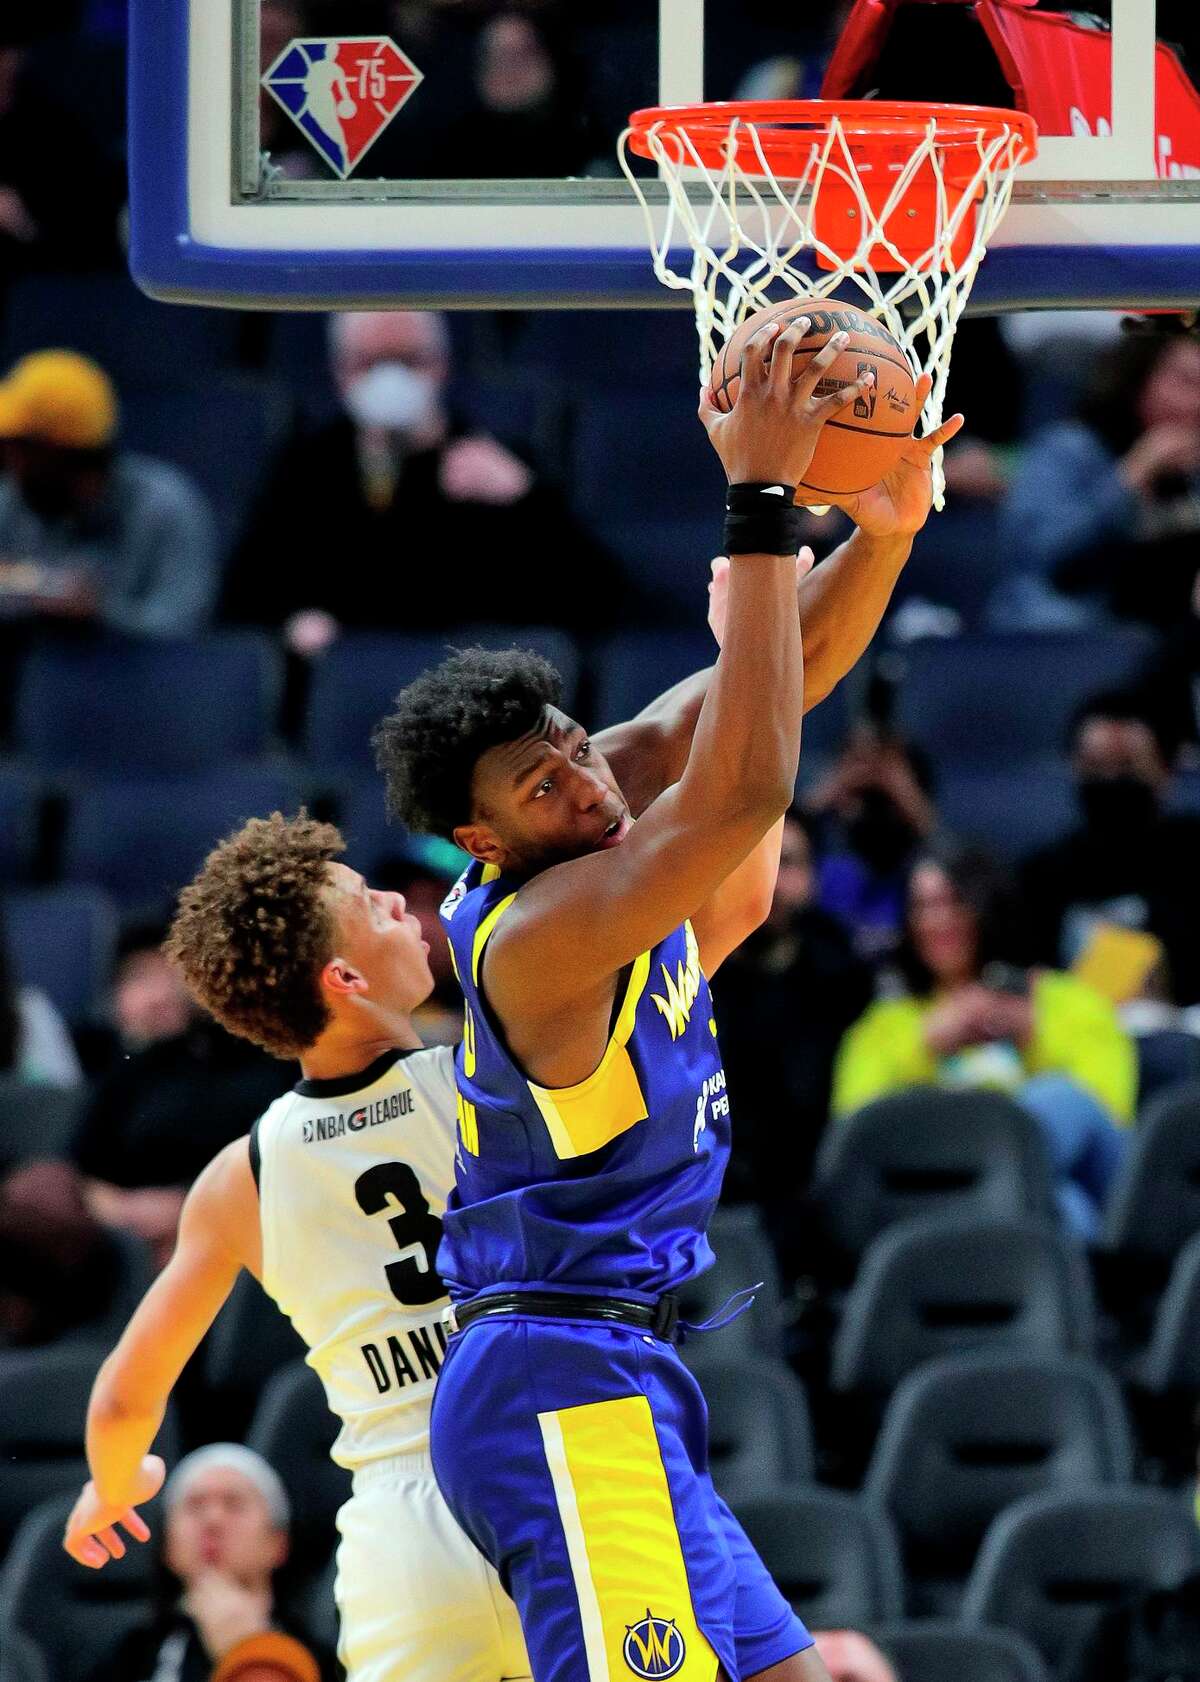 Center James Wiseman grabs a rebound agaist Dyson Daniels of G League Ignite during a game at Chase Center on March 13. Wiseman’s only action last season was two G League games.